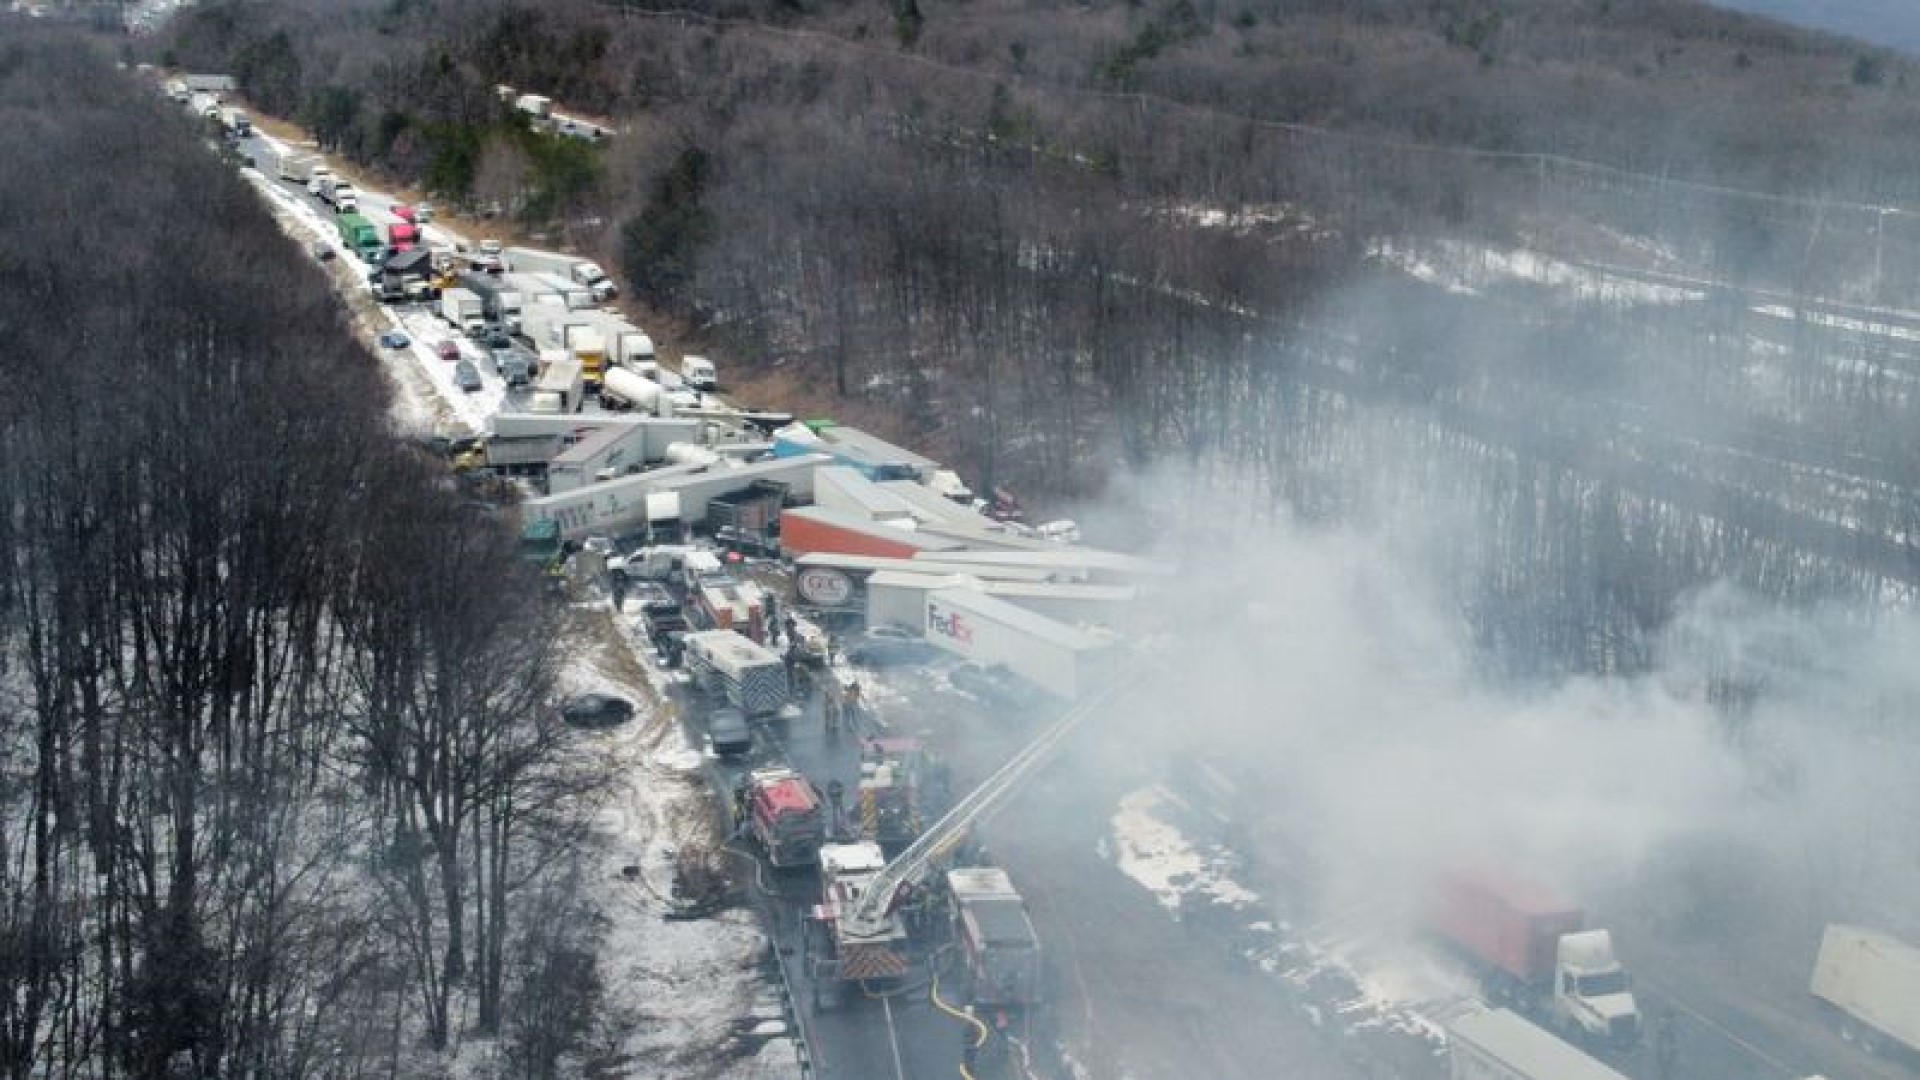 The smoky aftermath of a massive pile-up during a snow squall March 28, 2022, on Interstate 81 North in Schuylkill County, Pennsylvania.